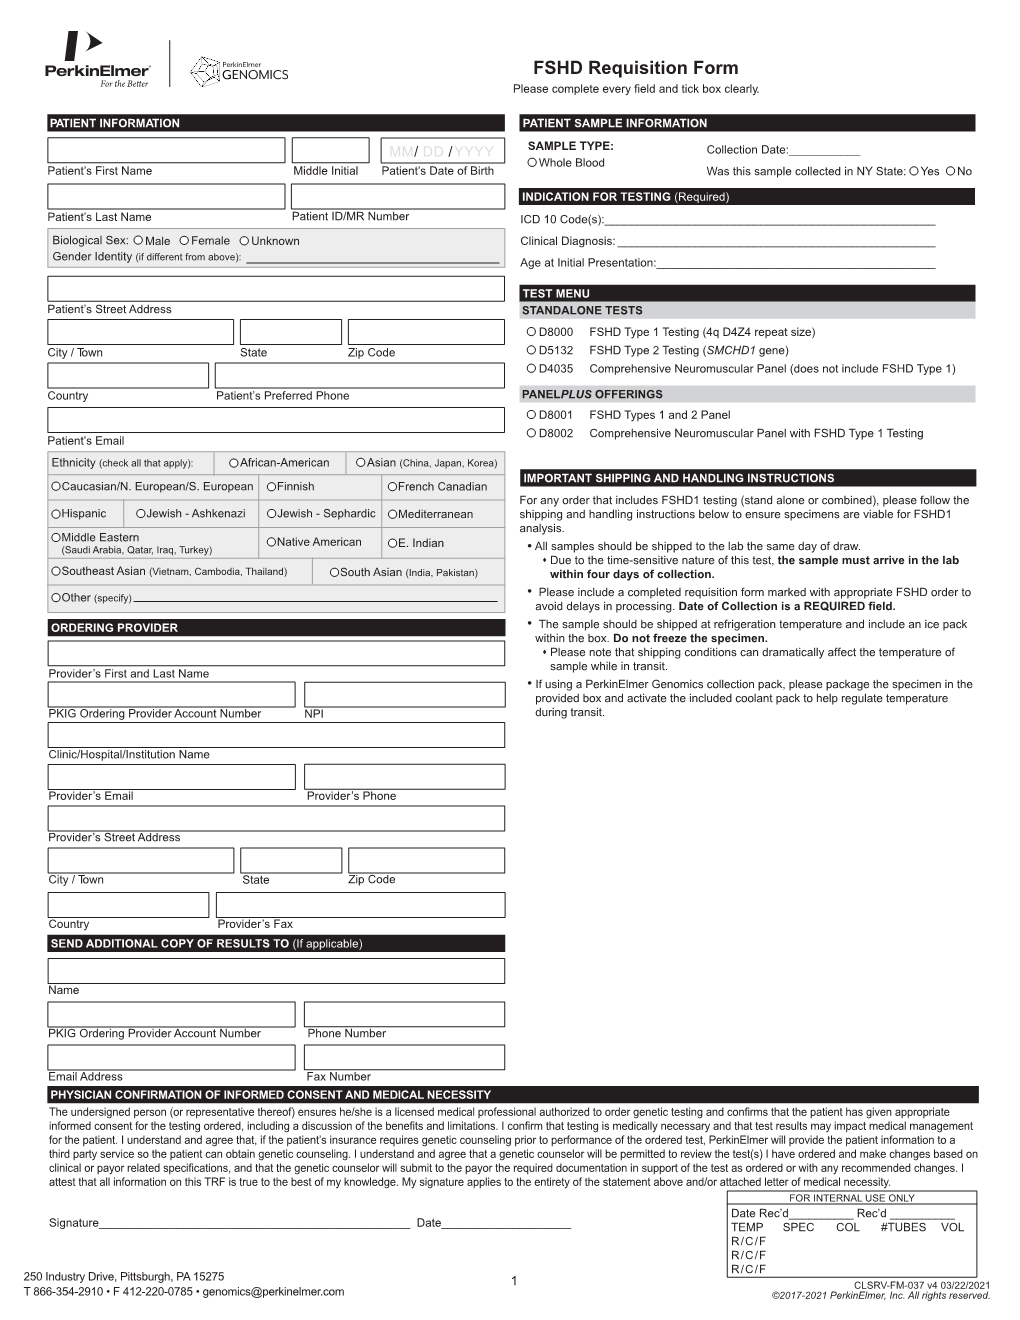 FSHD Requisition Form Please Complete Every Field and Tick Box Clearly